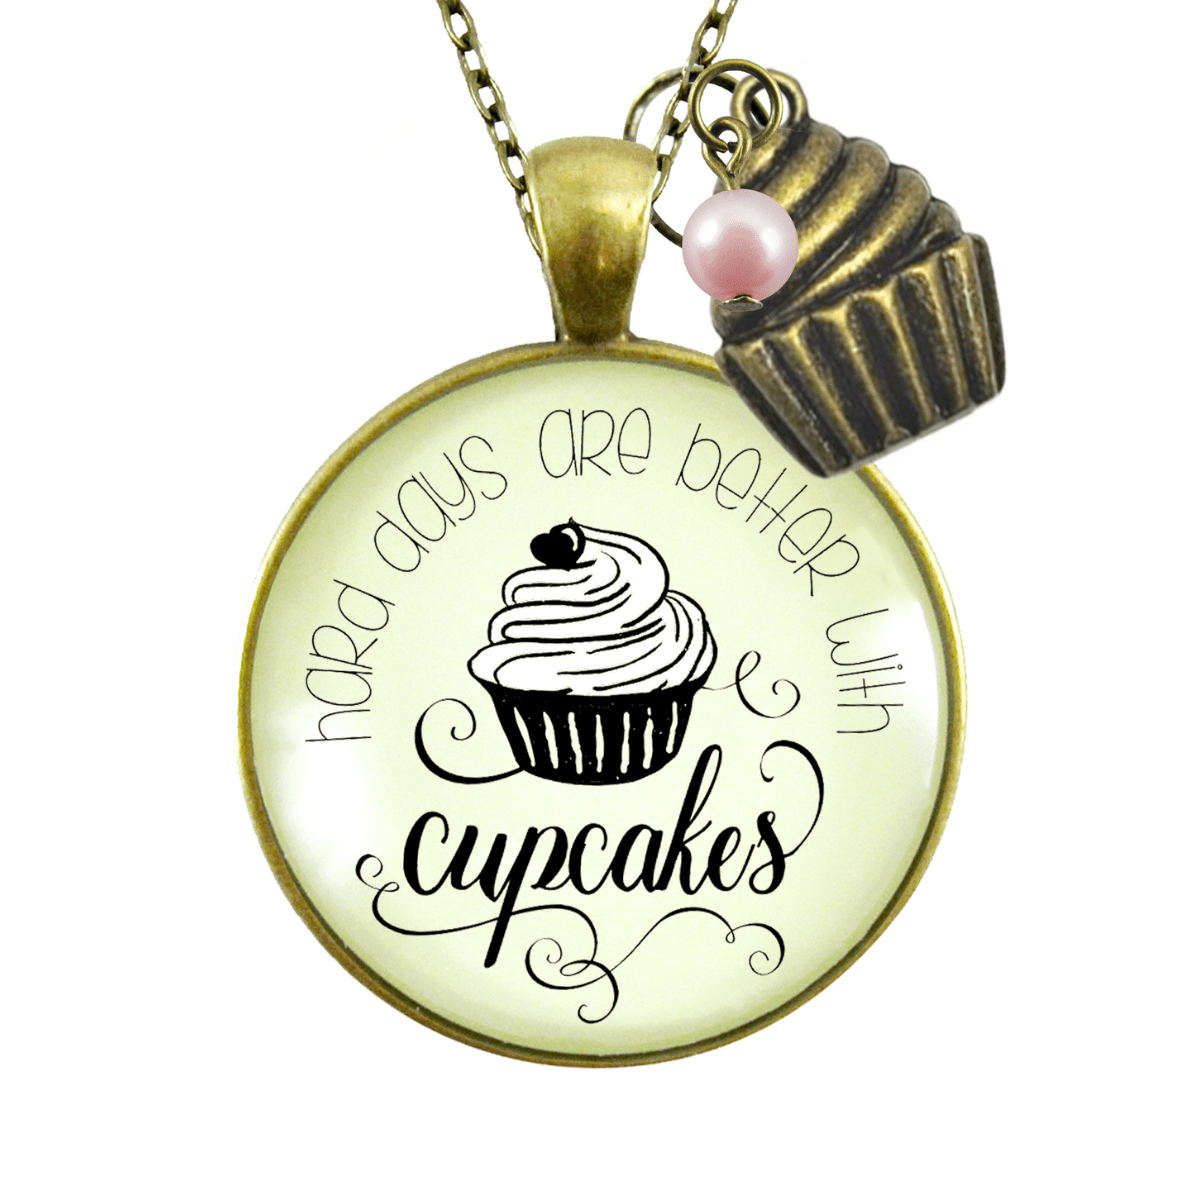 Gutsy Goodness Cupcake Necklace Hard Days Better Bakers Gift Jewelry Dessert Charm - Gutsy Goodness;Cupcake Necklace Hard Days Better Bakers Gift Jewelry Dessert Charm - Gutsy Goodness Handmade Jewelry Gifts